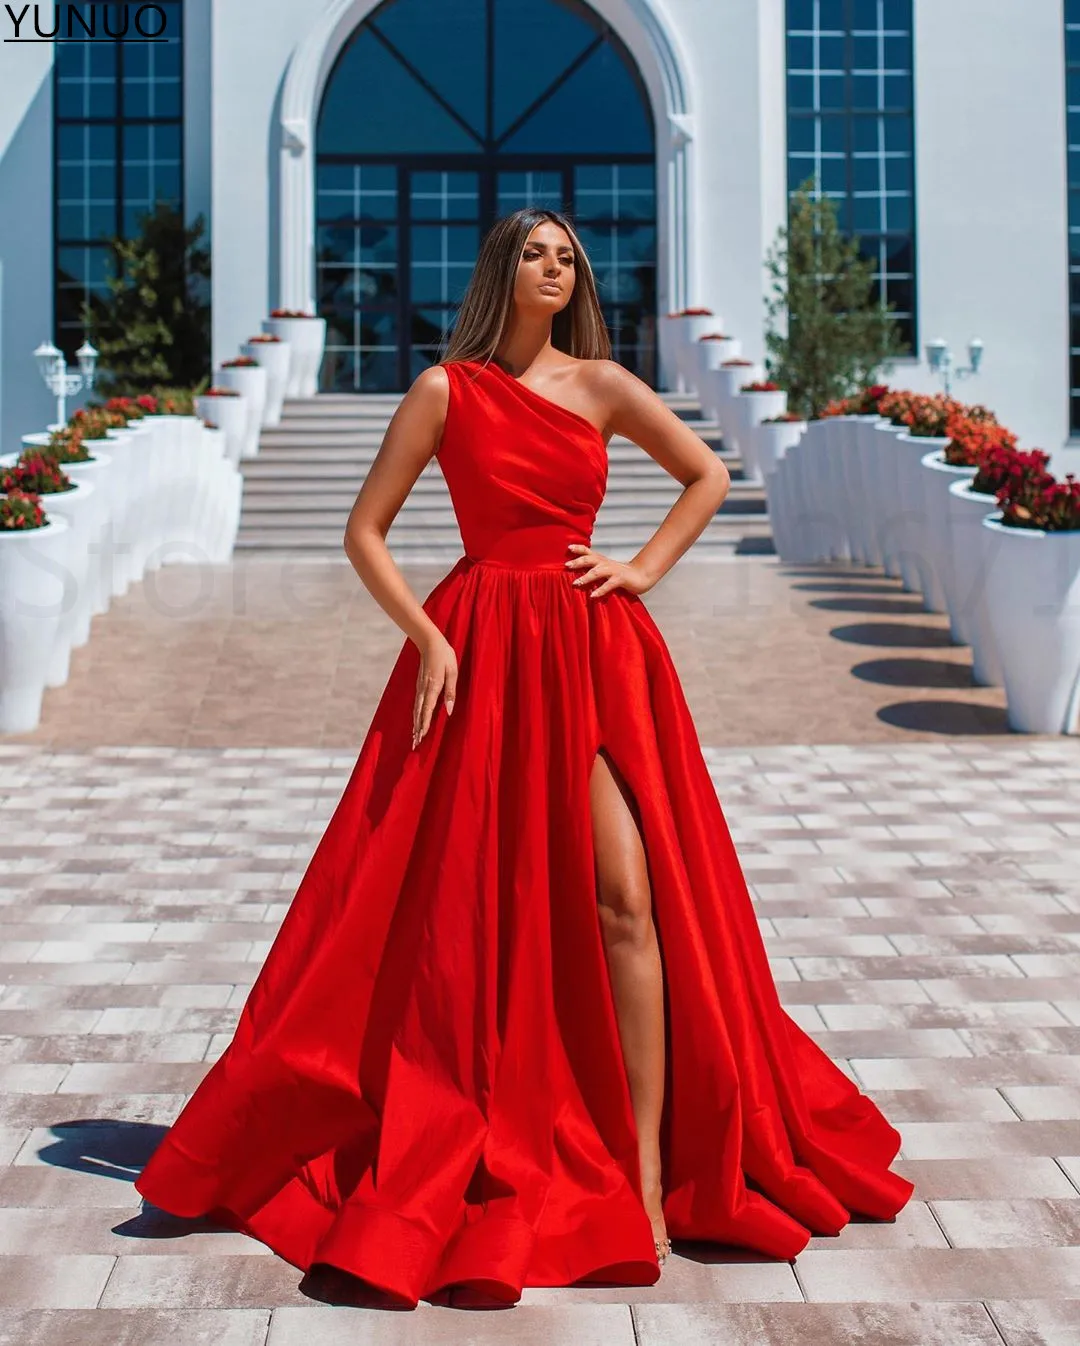 green ball gown YUNUO Elegant Purple Long Prom Evening Dresses One Shoulder Satin Side Slit Party Gowns A-line Sleeveless Formal Occasion Dress burgundy prom dresses